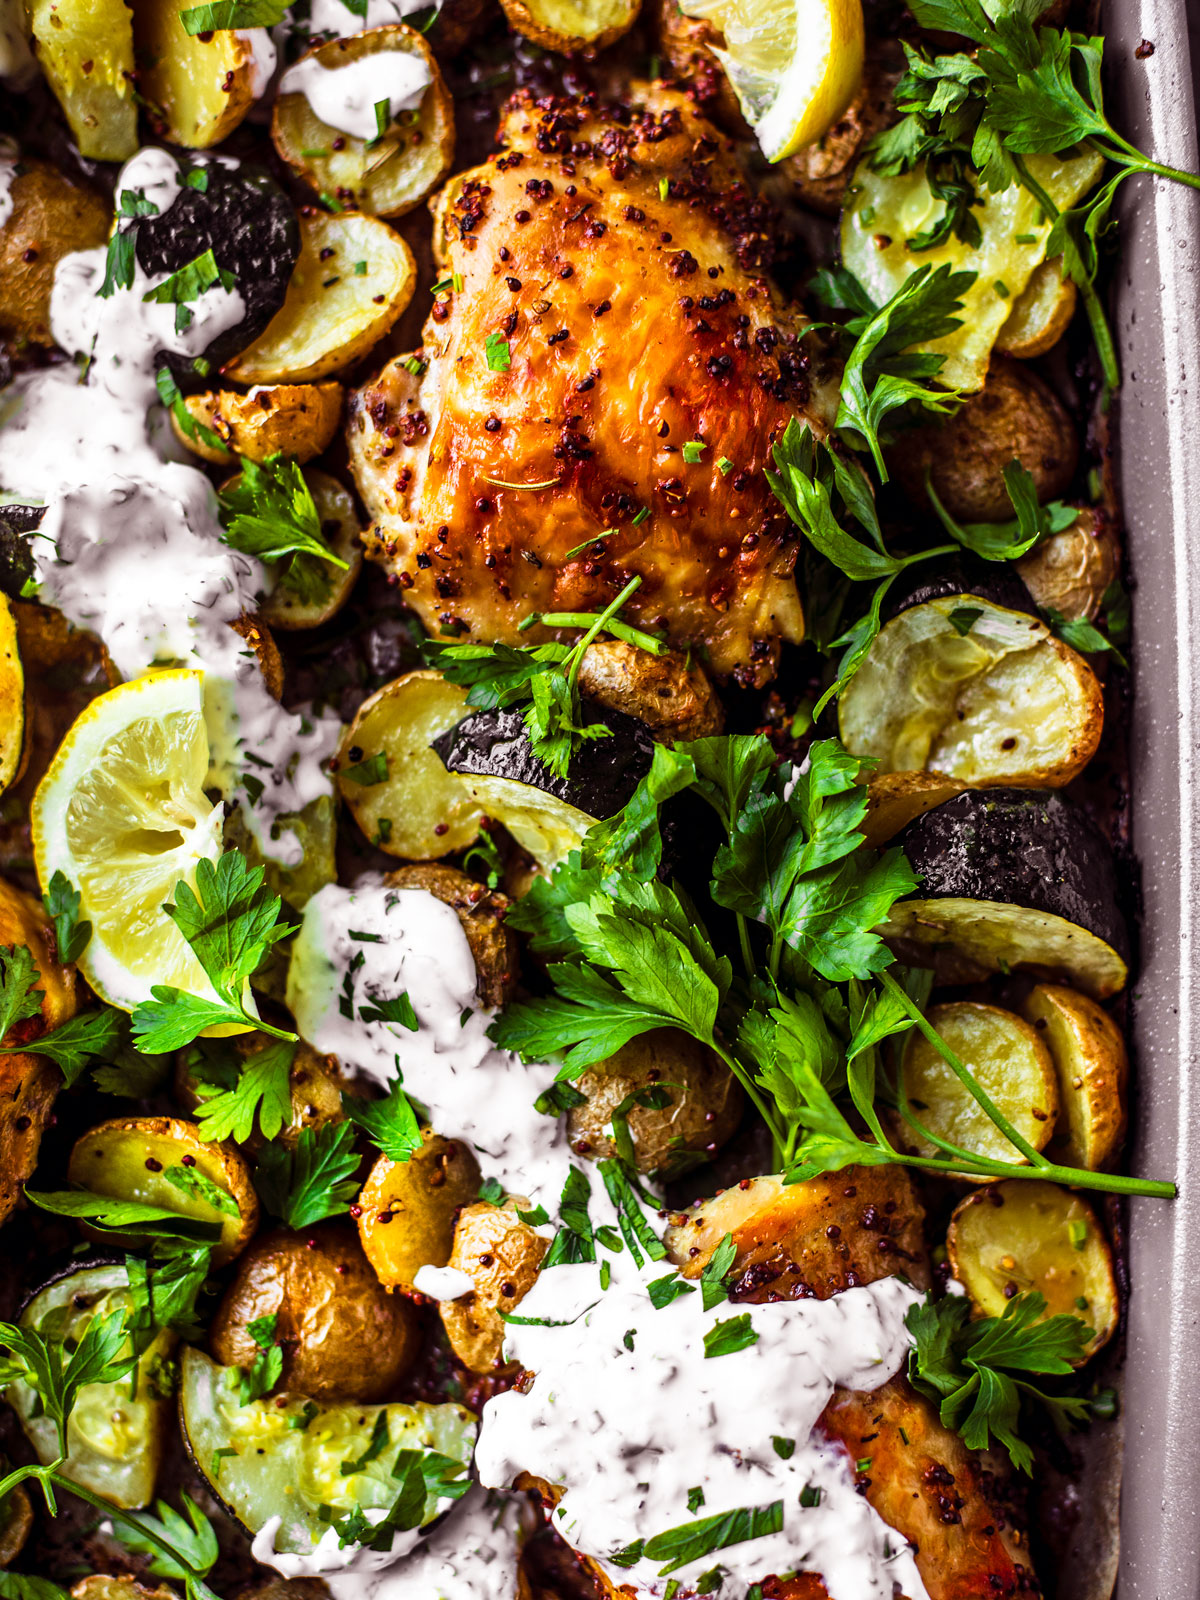 Close up of roasted chicken thighs, zucchini, potatoes, with a drizzle of yogurt sauce and fresh herbs on a sheet pan.